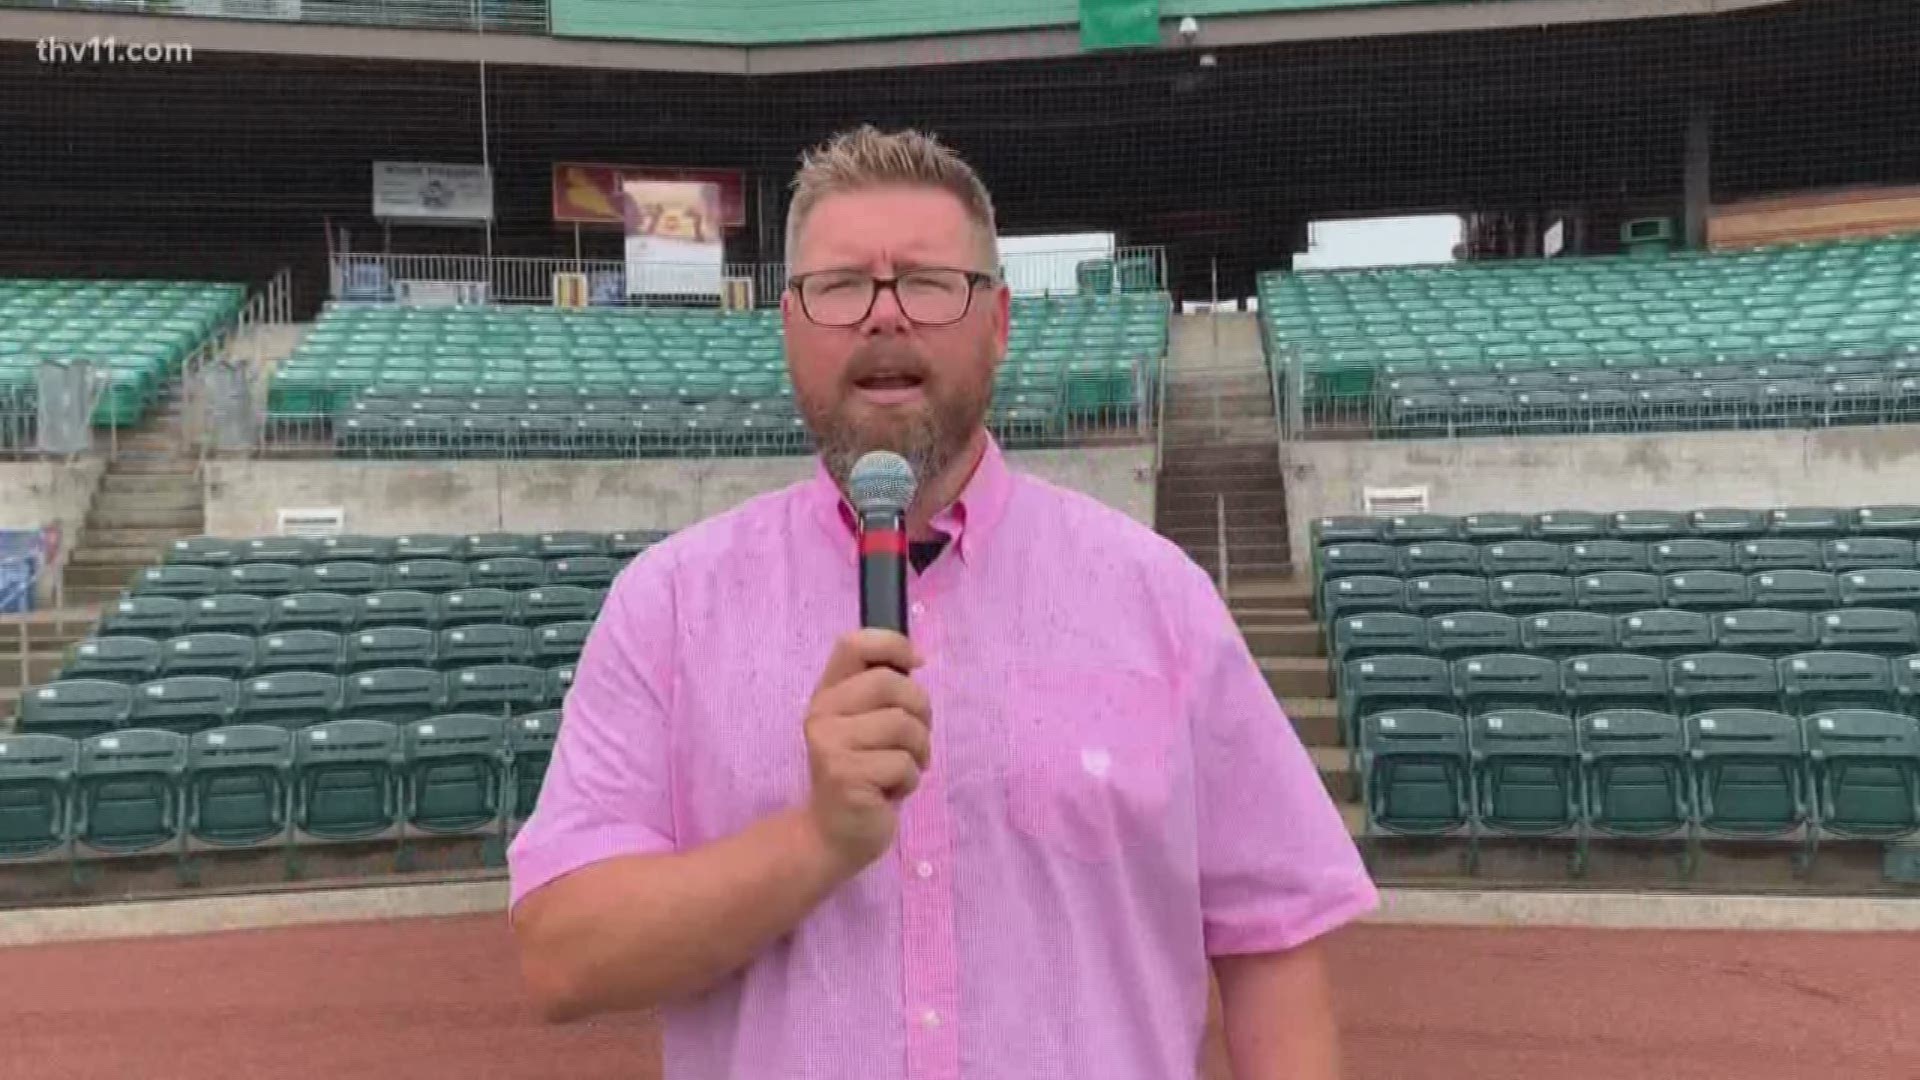 It may be hot outside, but that's not stopping the Travs and THV11 from having a good time at the ballpark. Lance Restum with the Arkansas Travelers joins us to talk about a few upcoming THV11 nights.